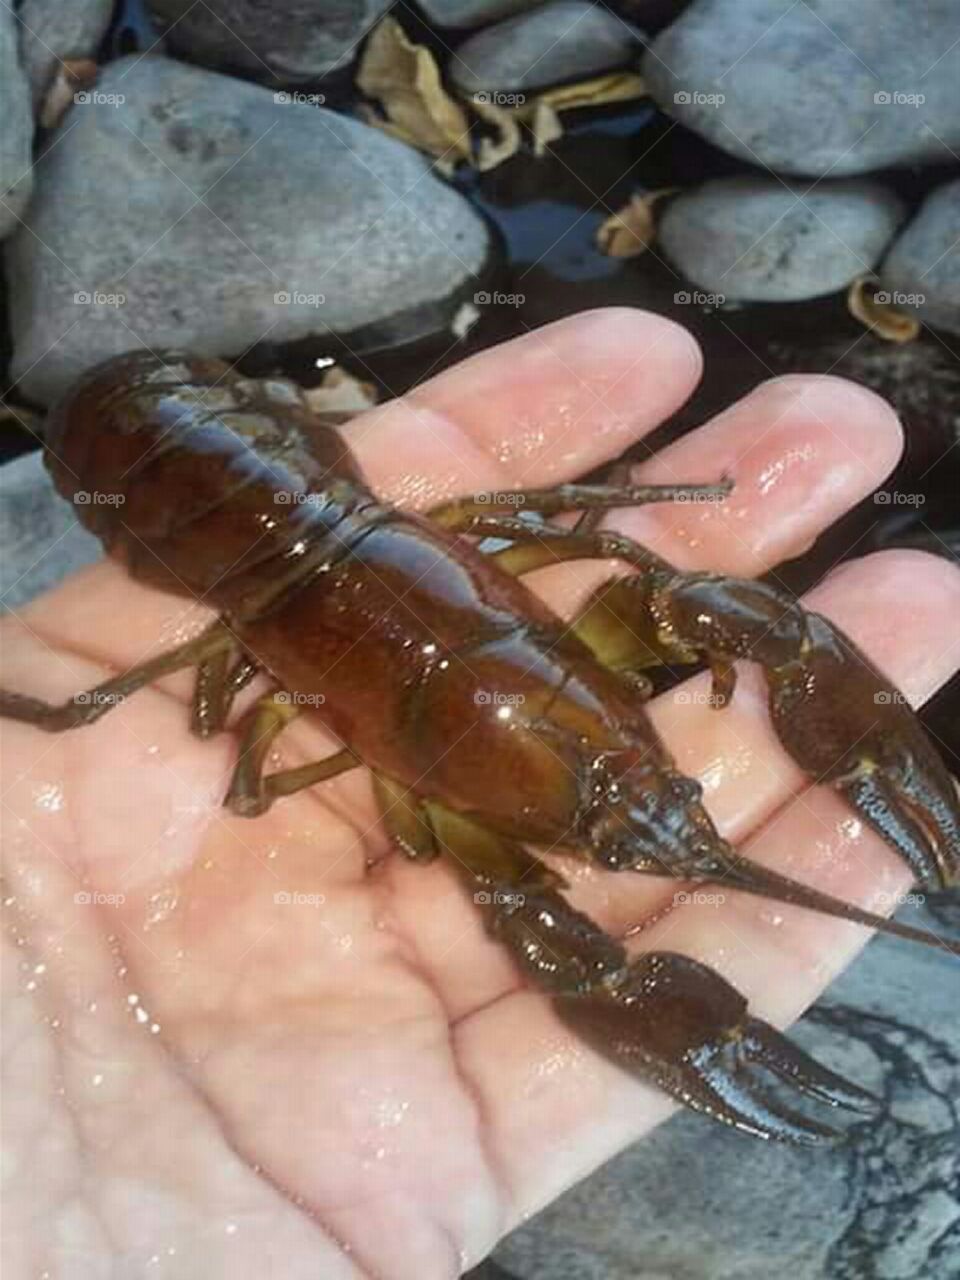 close up image of crawdad or mud bug in someone's hand